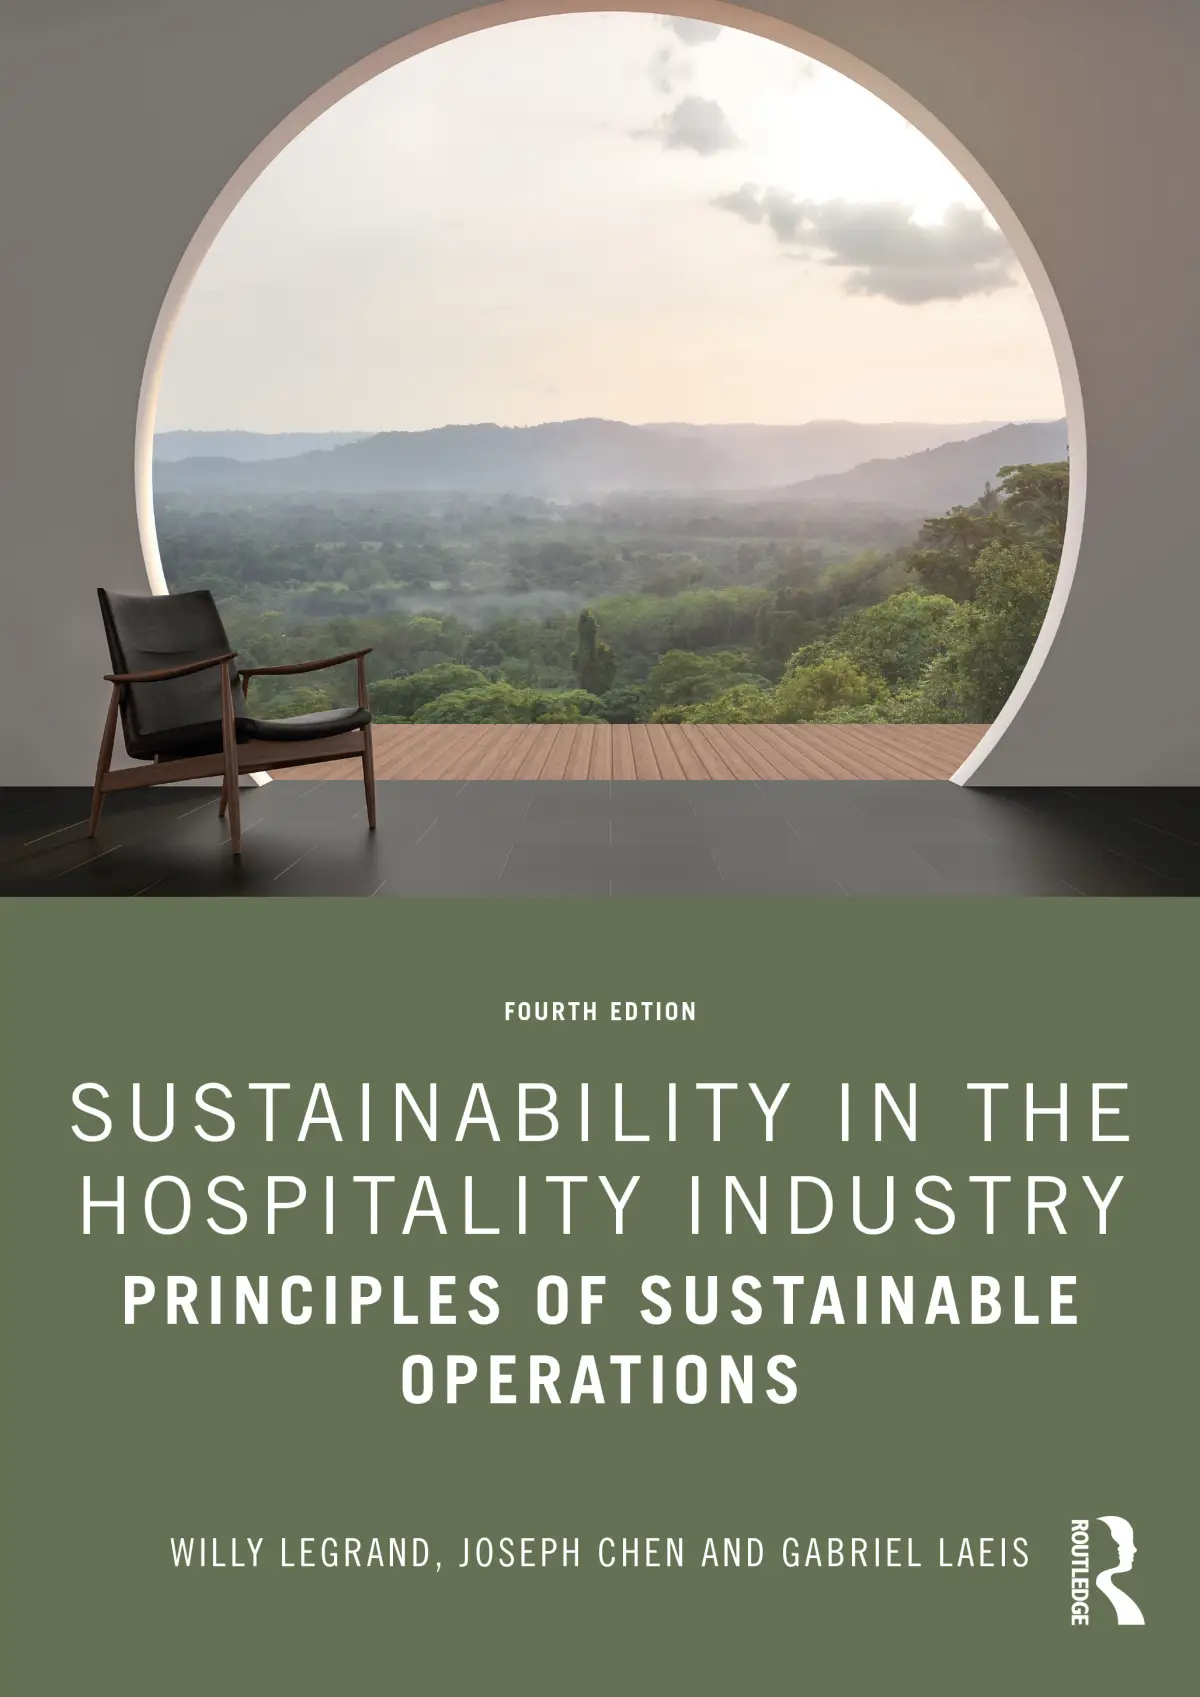 Sustainability in the Hospitality Industry: Principles of Sustainable Operations by Willy Legrand, Joseph Chen and Gabriel Laeis